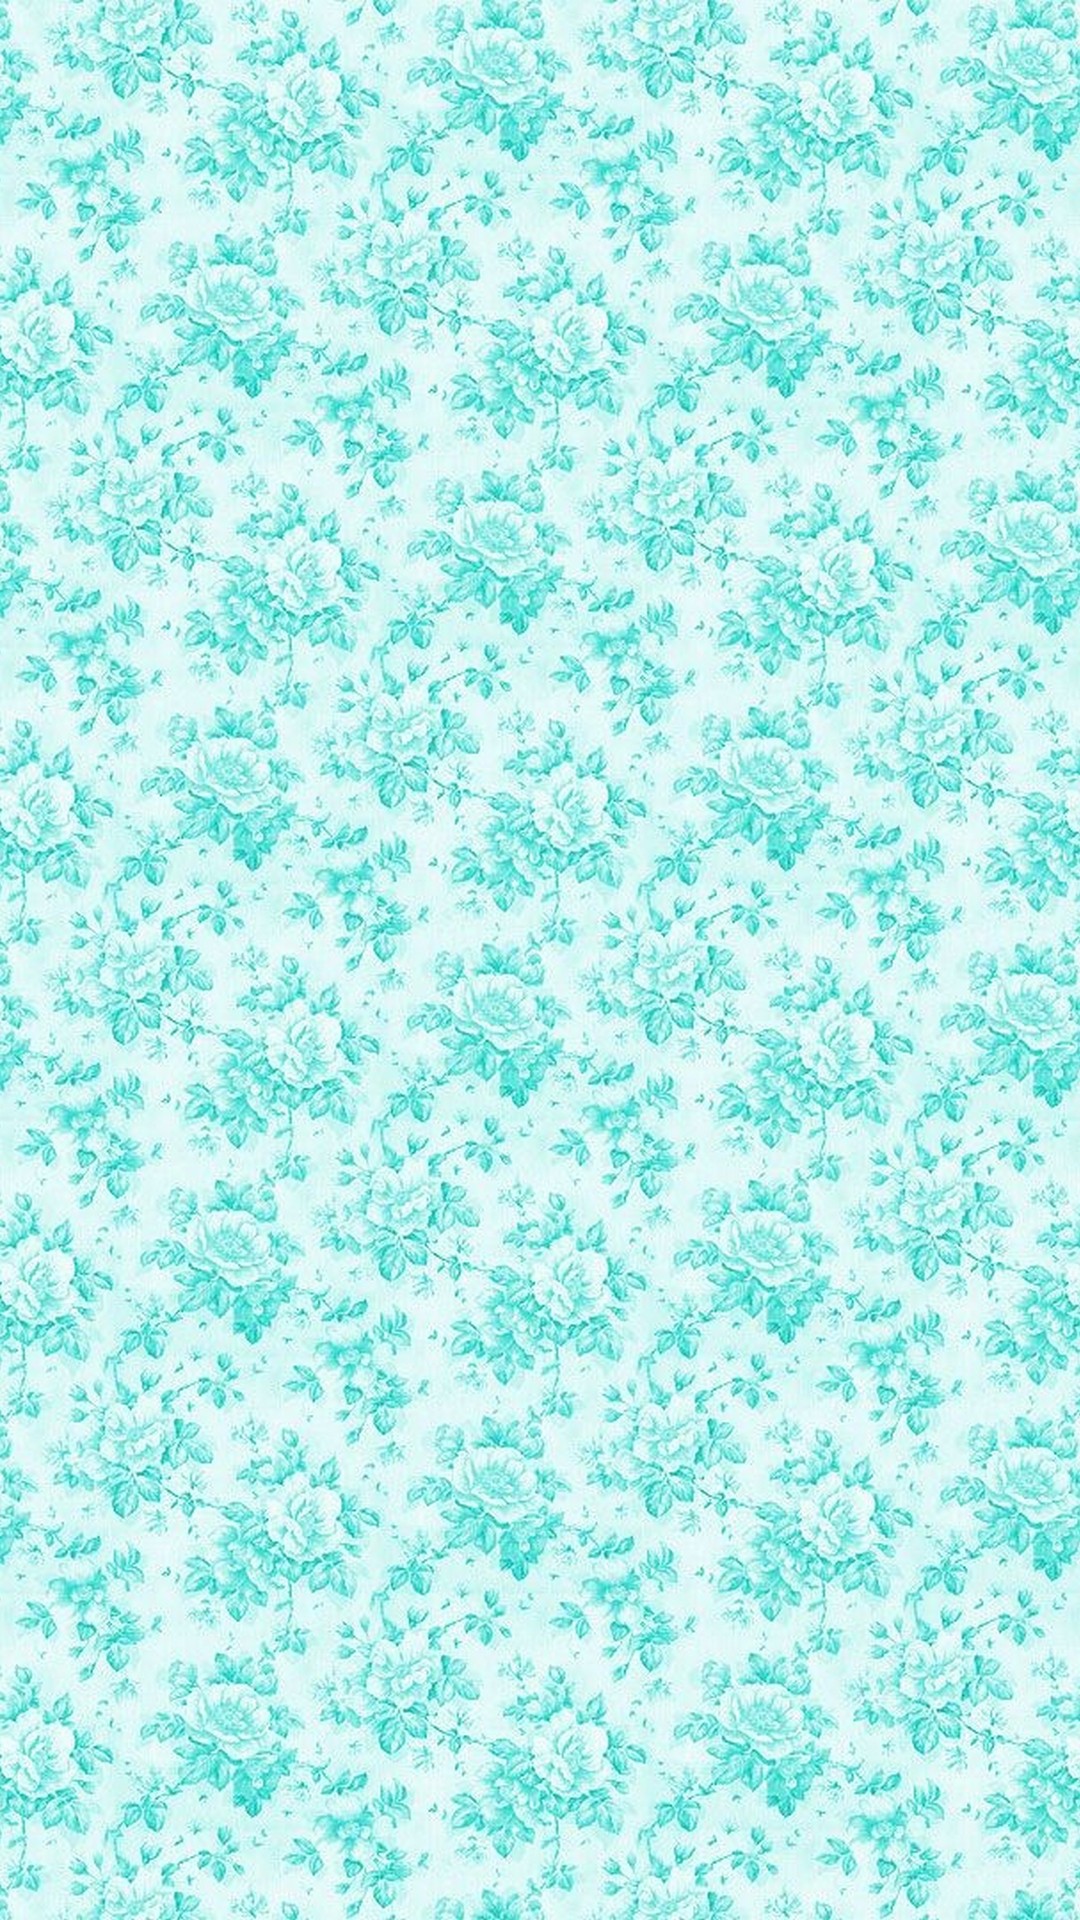 Mint Green Wallpaper iPhone with resolution 1080X1920 pixel. You can make this wallpaper for your iPhone 5, 6, 7, 8, X backgrounds, Mobile Screensaver, or iPad Lock Screen